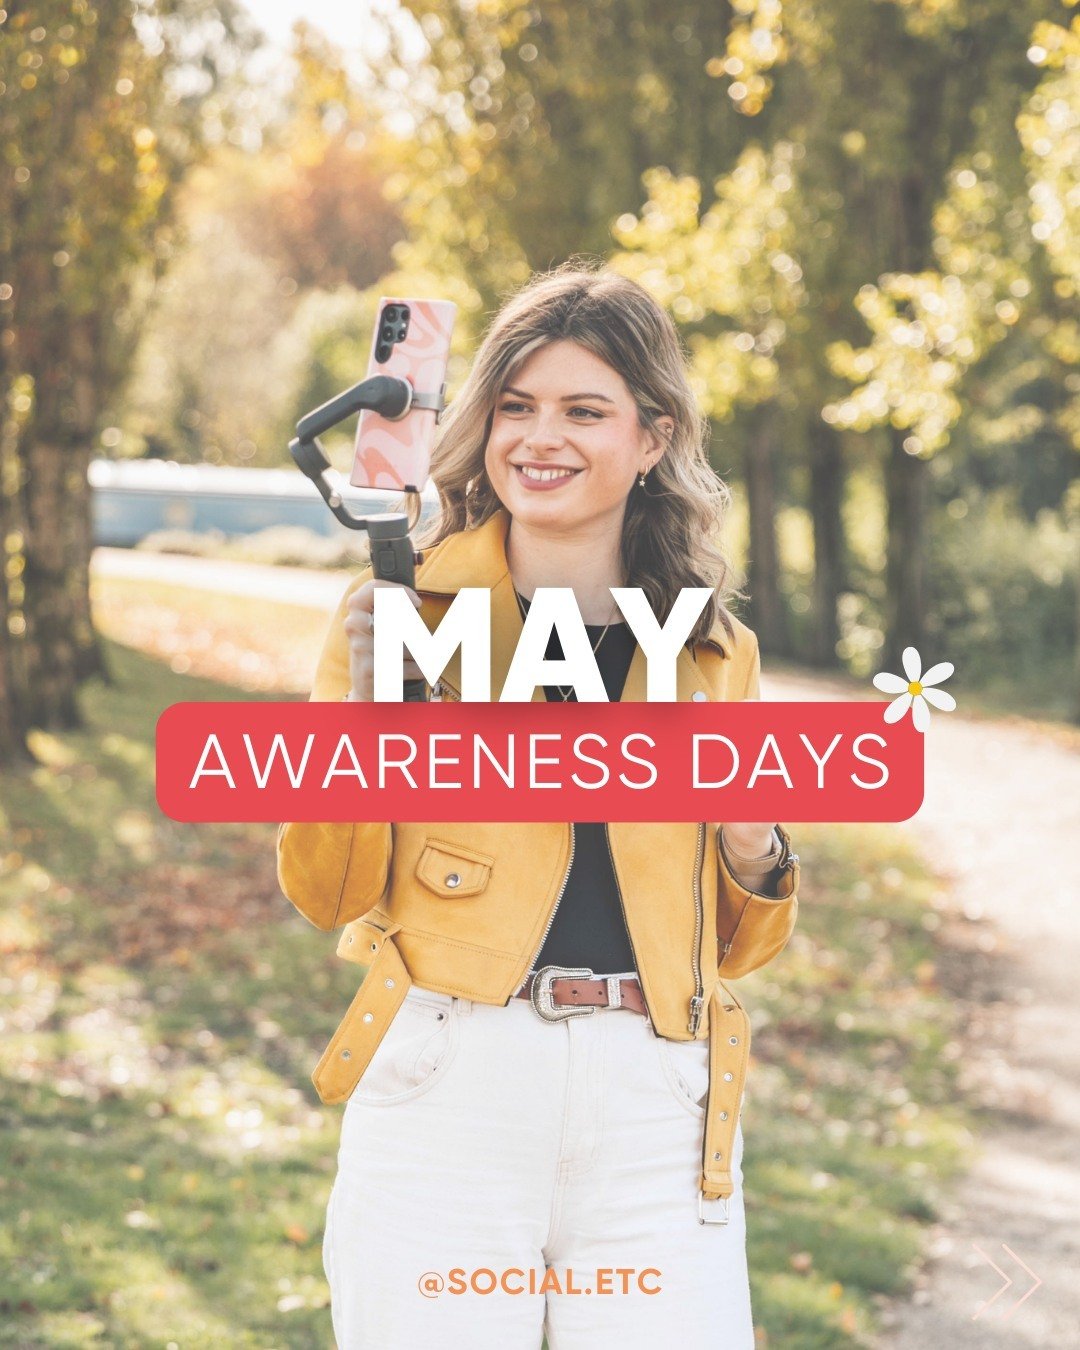 MAY AWARENESS DAYS 🗓️

And just like that, we're in May! With the longer, warmer days finally starting to make an appearance, I want to share some content ideas to make your marketing a breeze.

Check out these easy content ideas for this month, so 